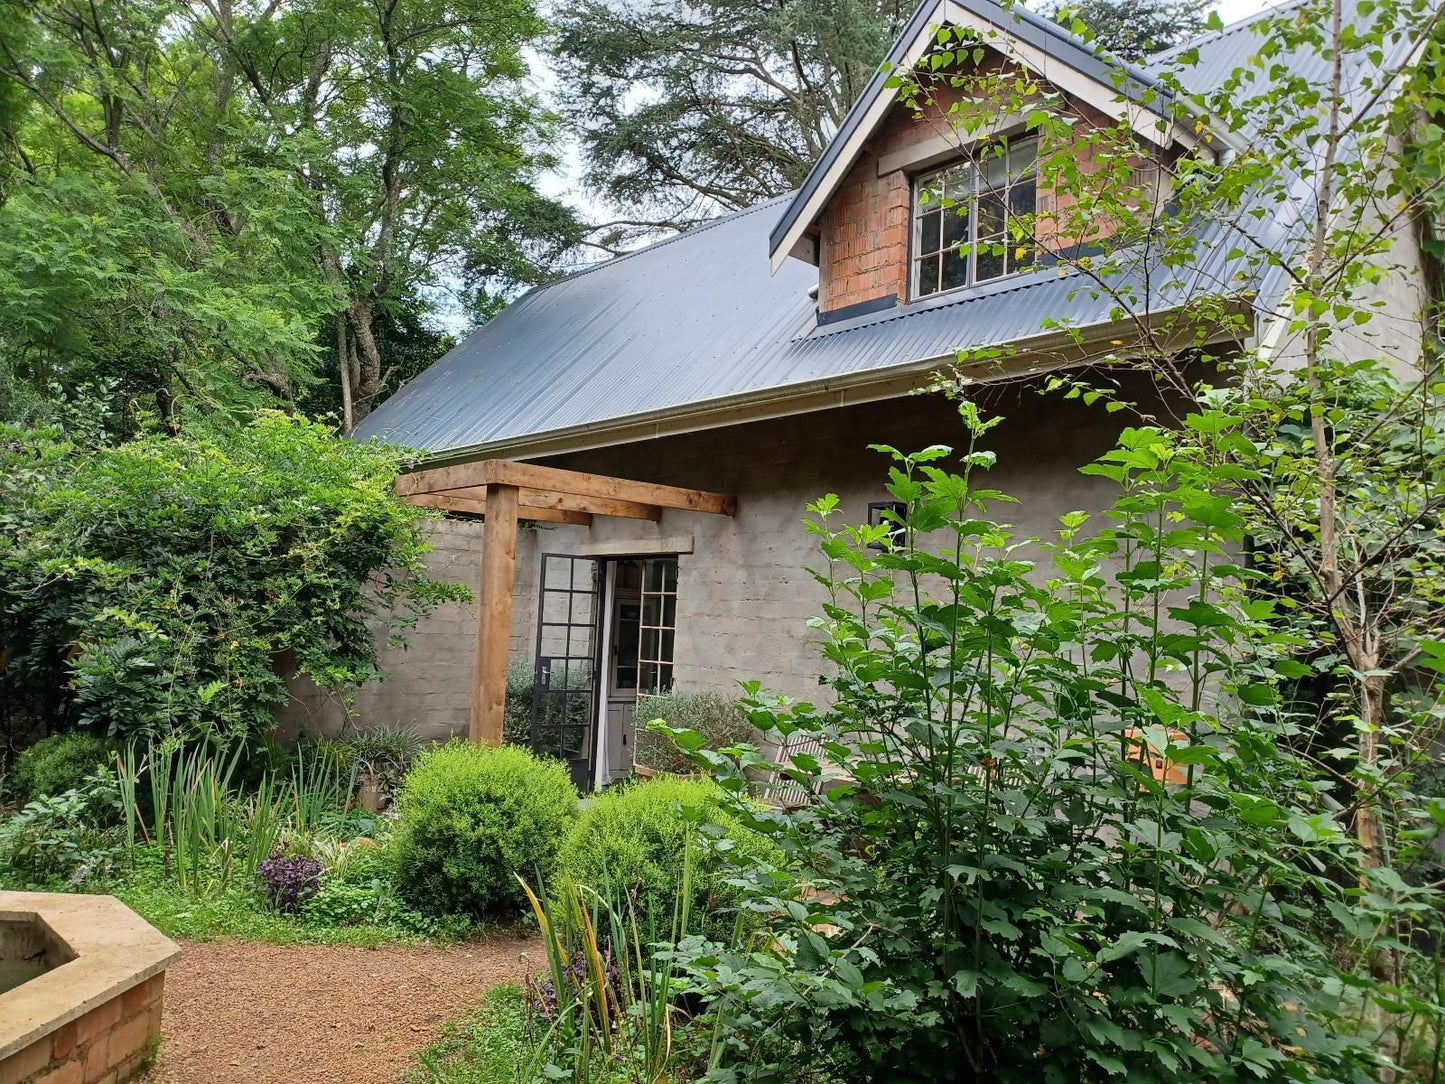 Little Fields Country House Howick Kwazulu Natal South Africa Building, Architecture, House, Garden, Nature, Plant